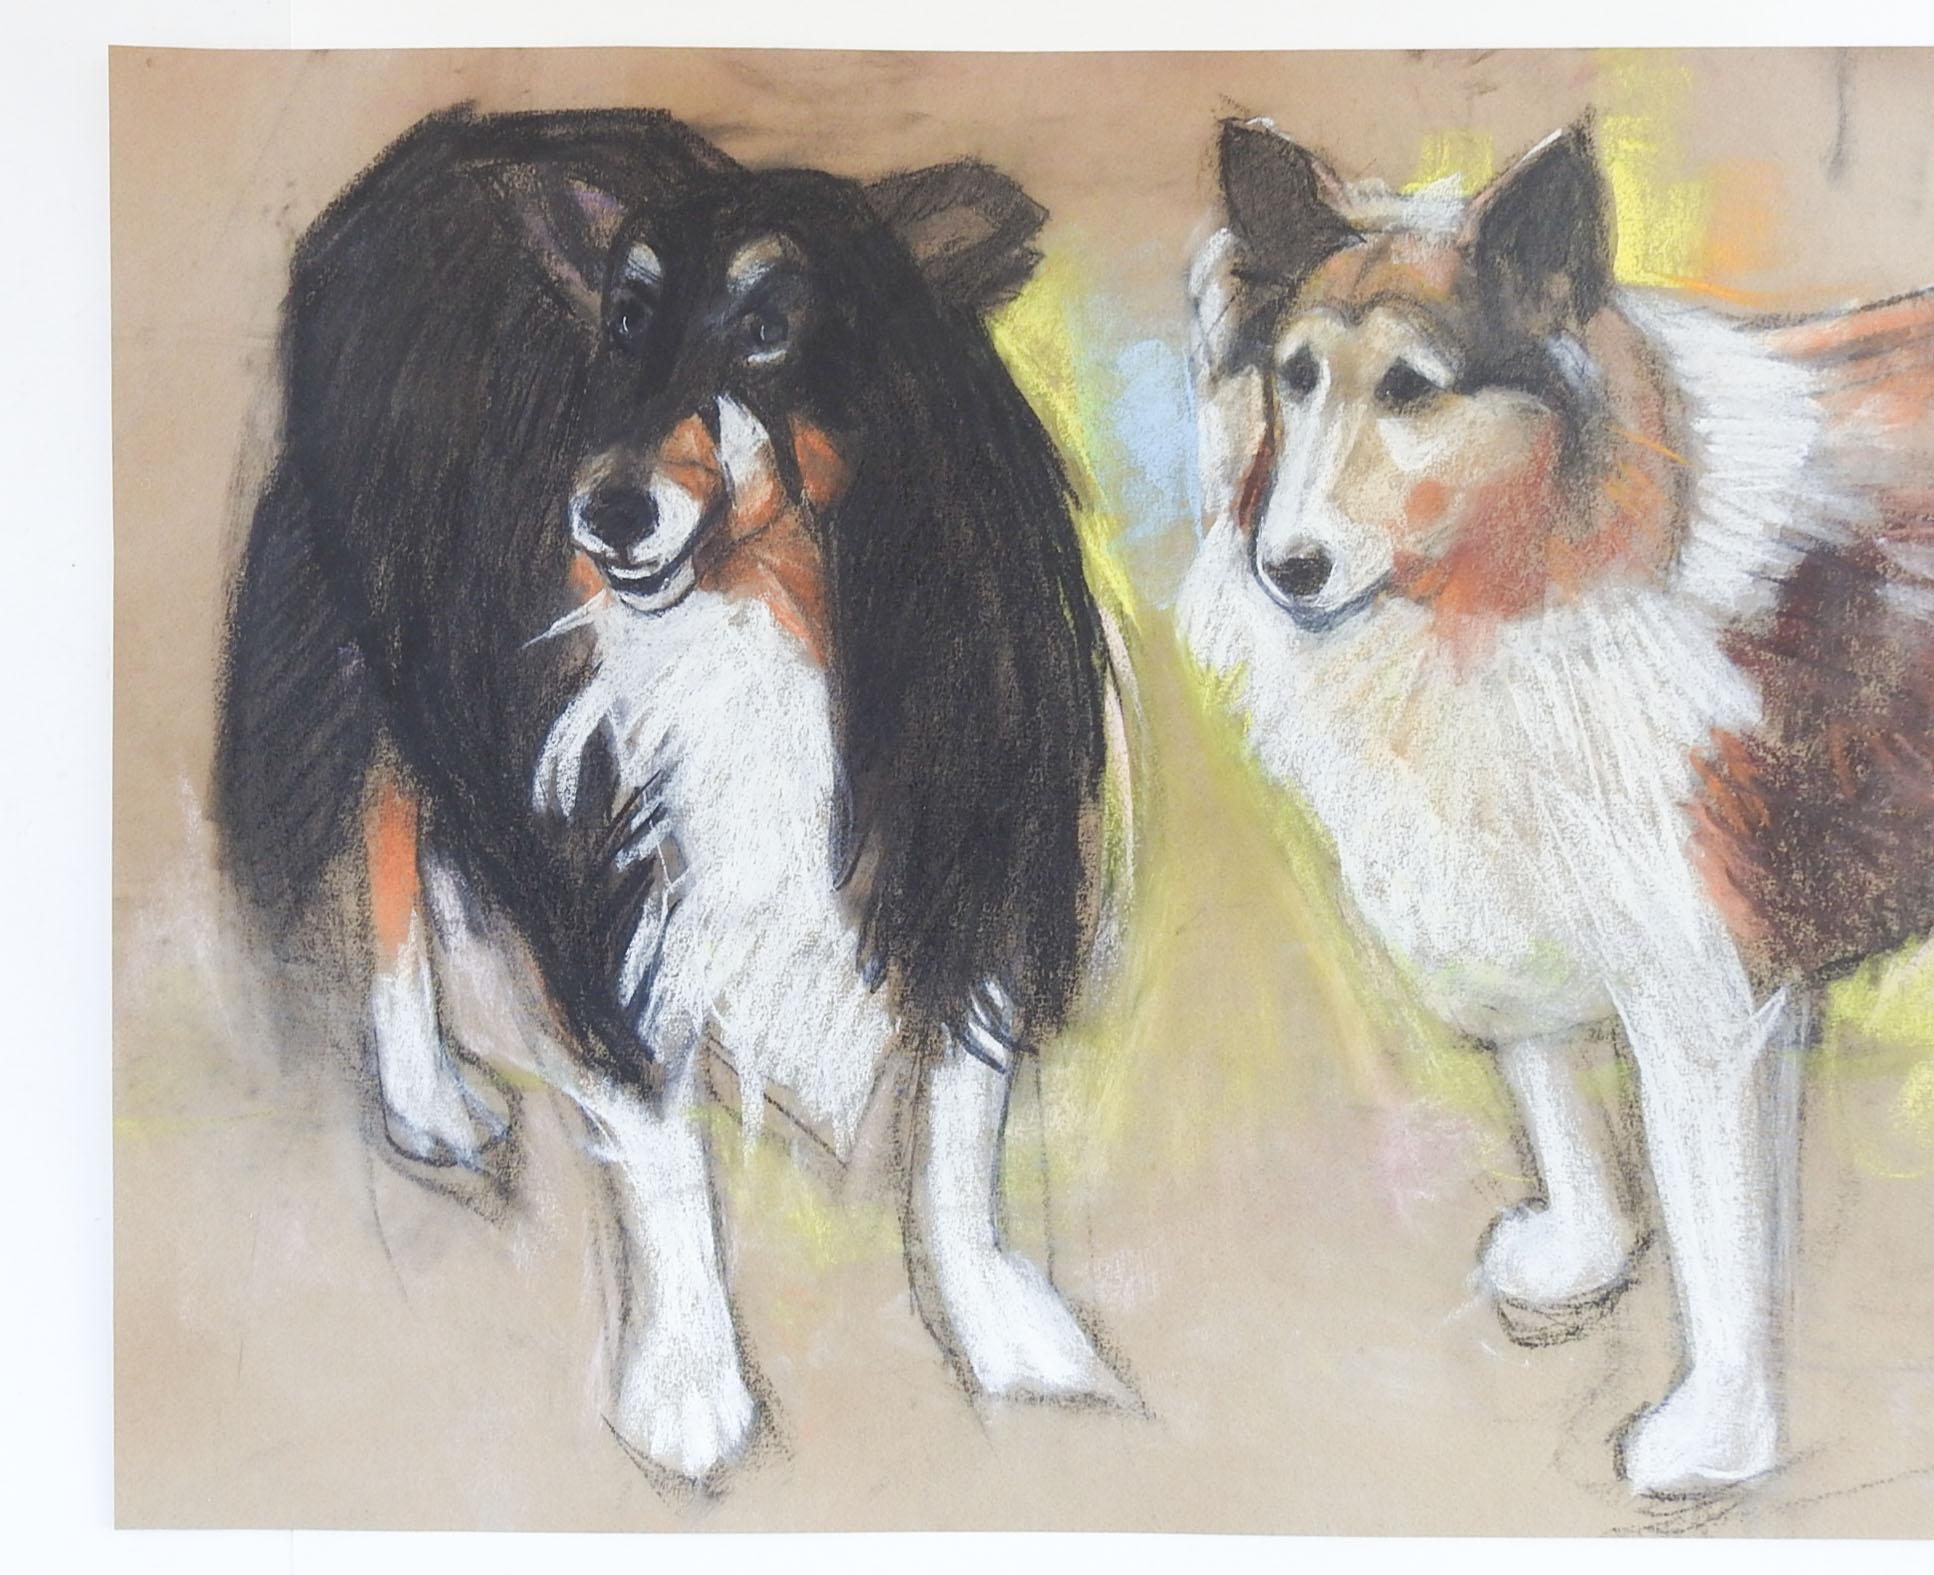 Circa 1990's long format pastel on paper of a pair of Sheltie or Collie dogs by Steve Hodges (20th century) Texas. Unsigned. Unframed, from the artists estate, some smuging.